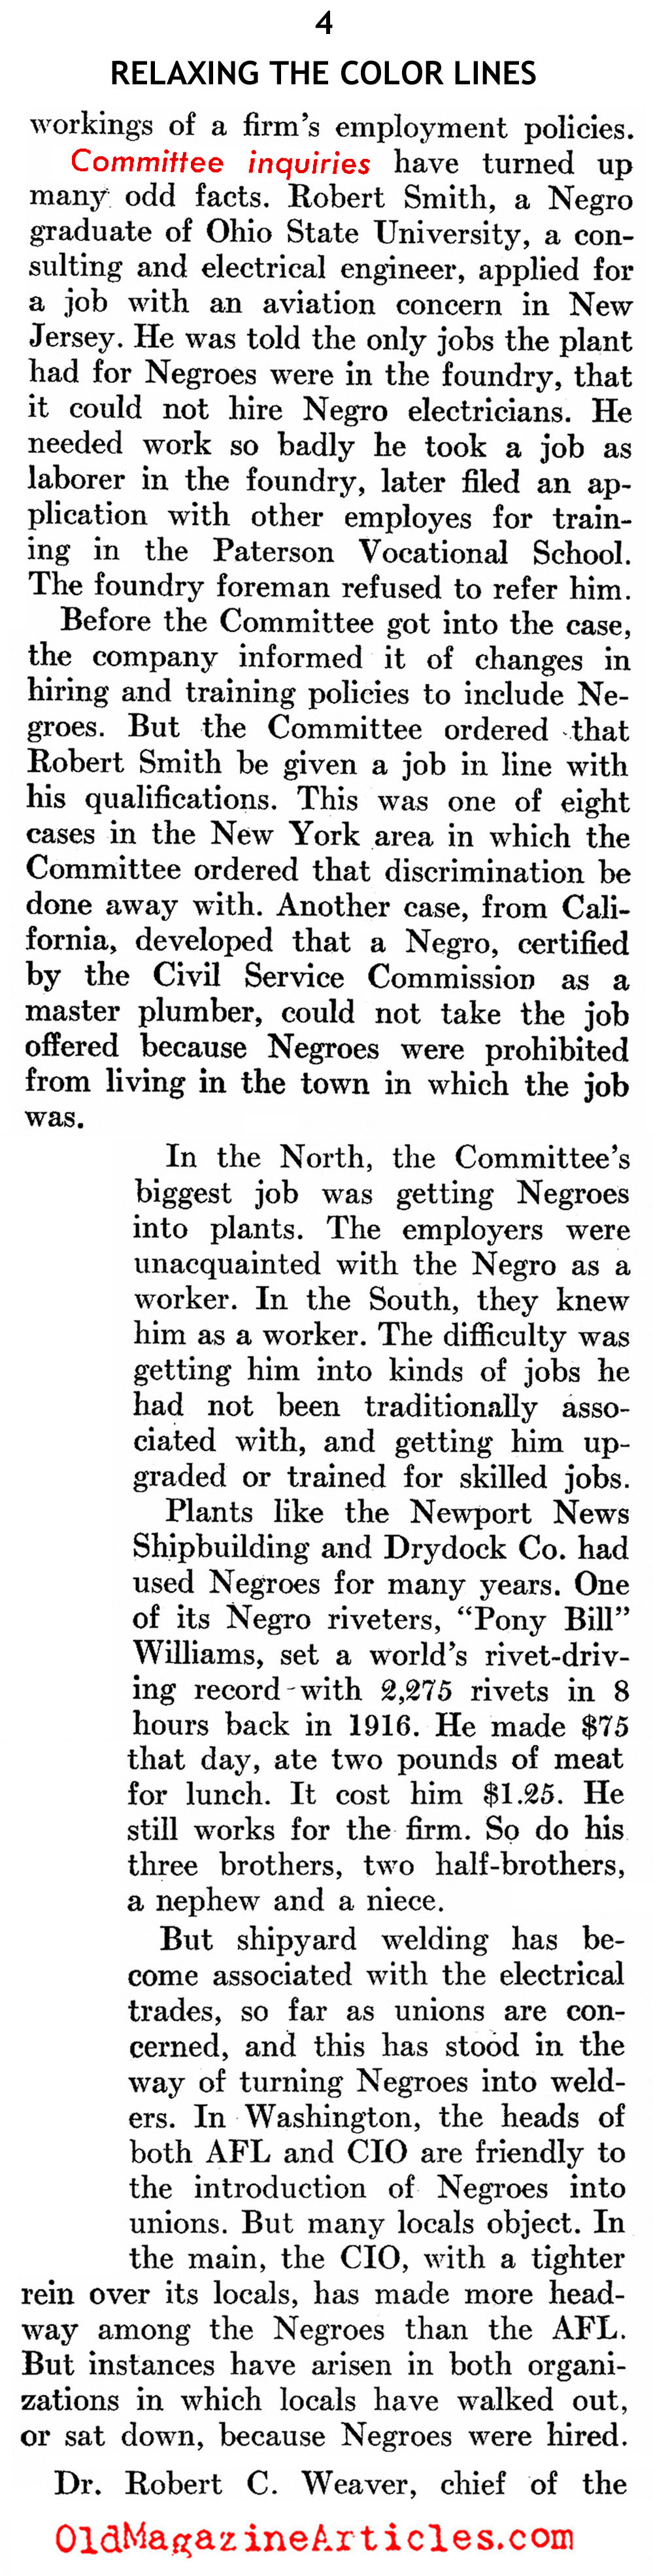 With The War Came New Opportunities (United States News, 1942)